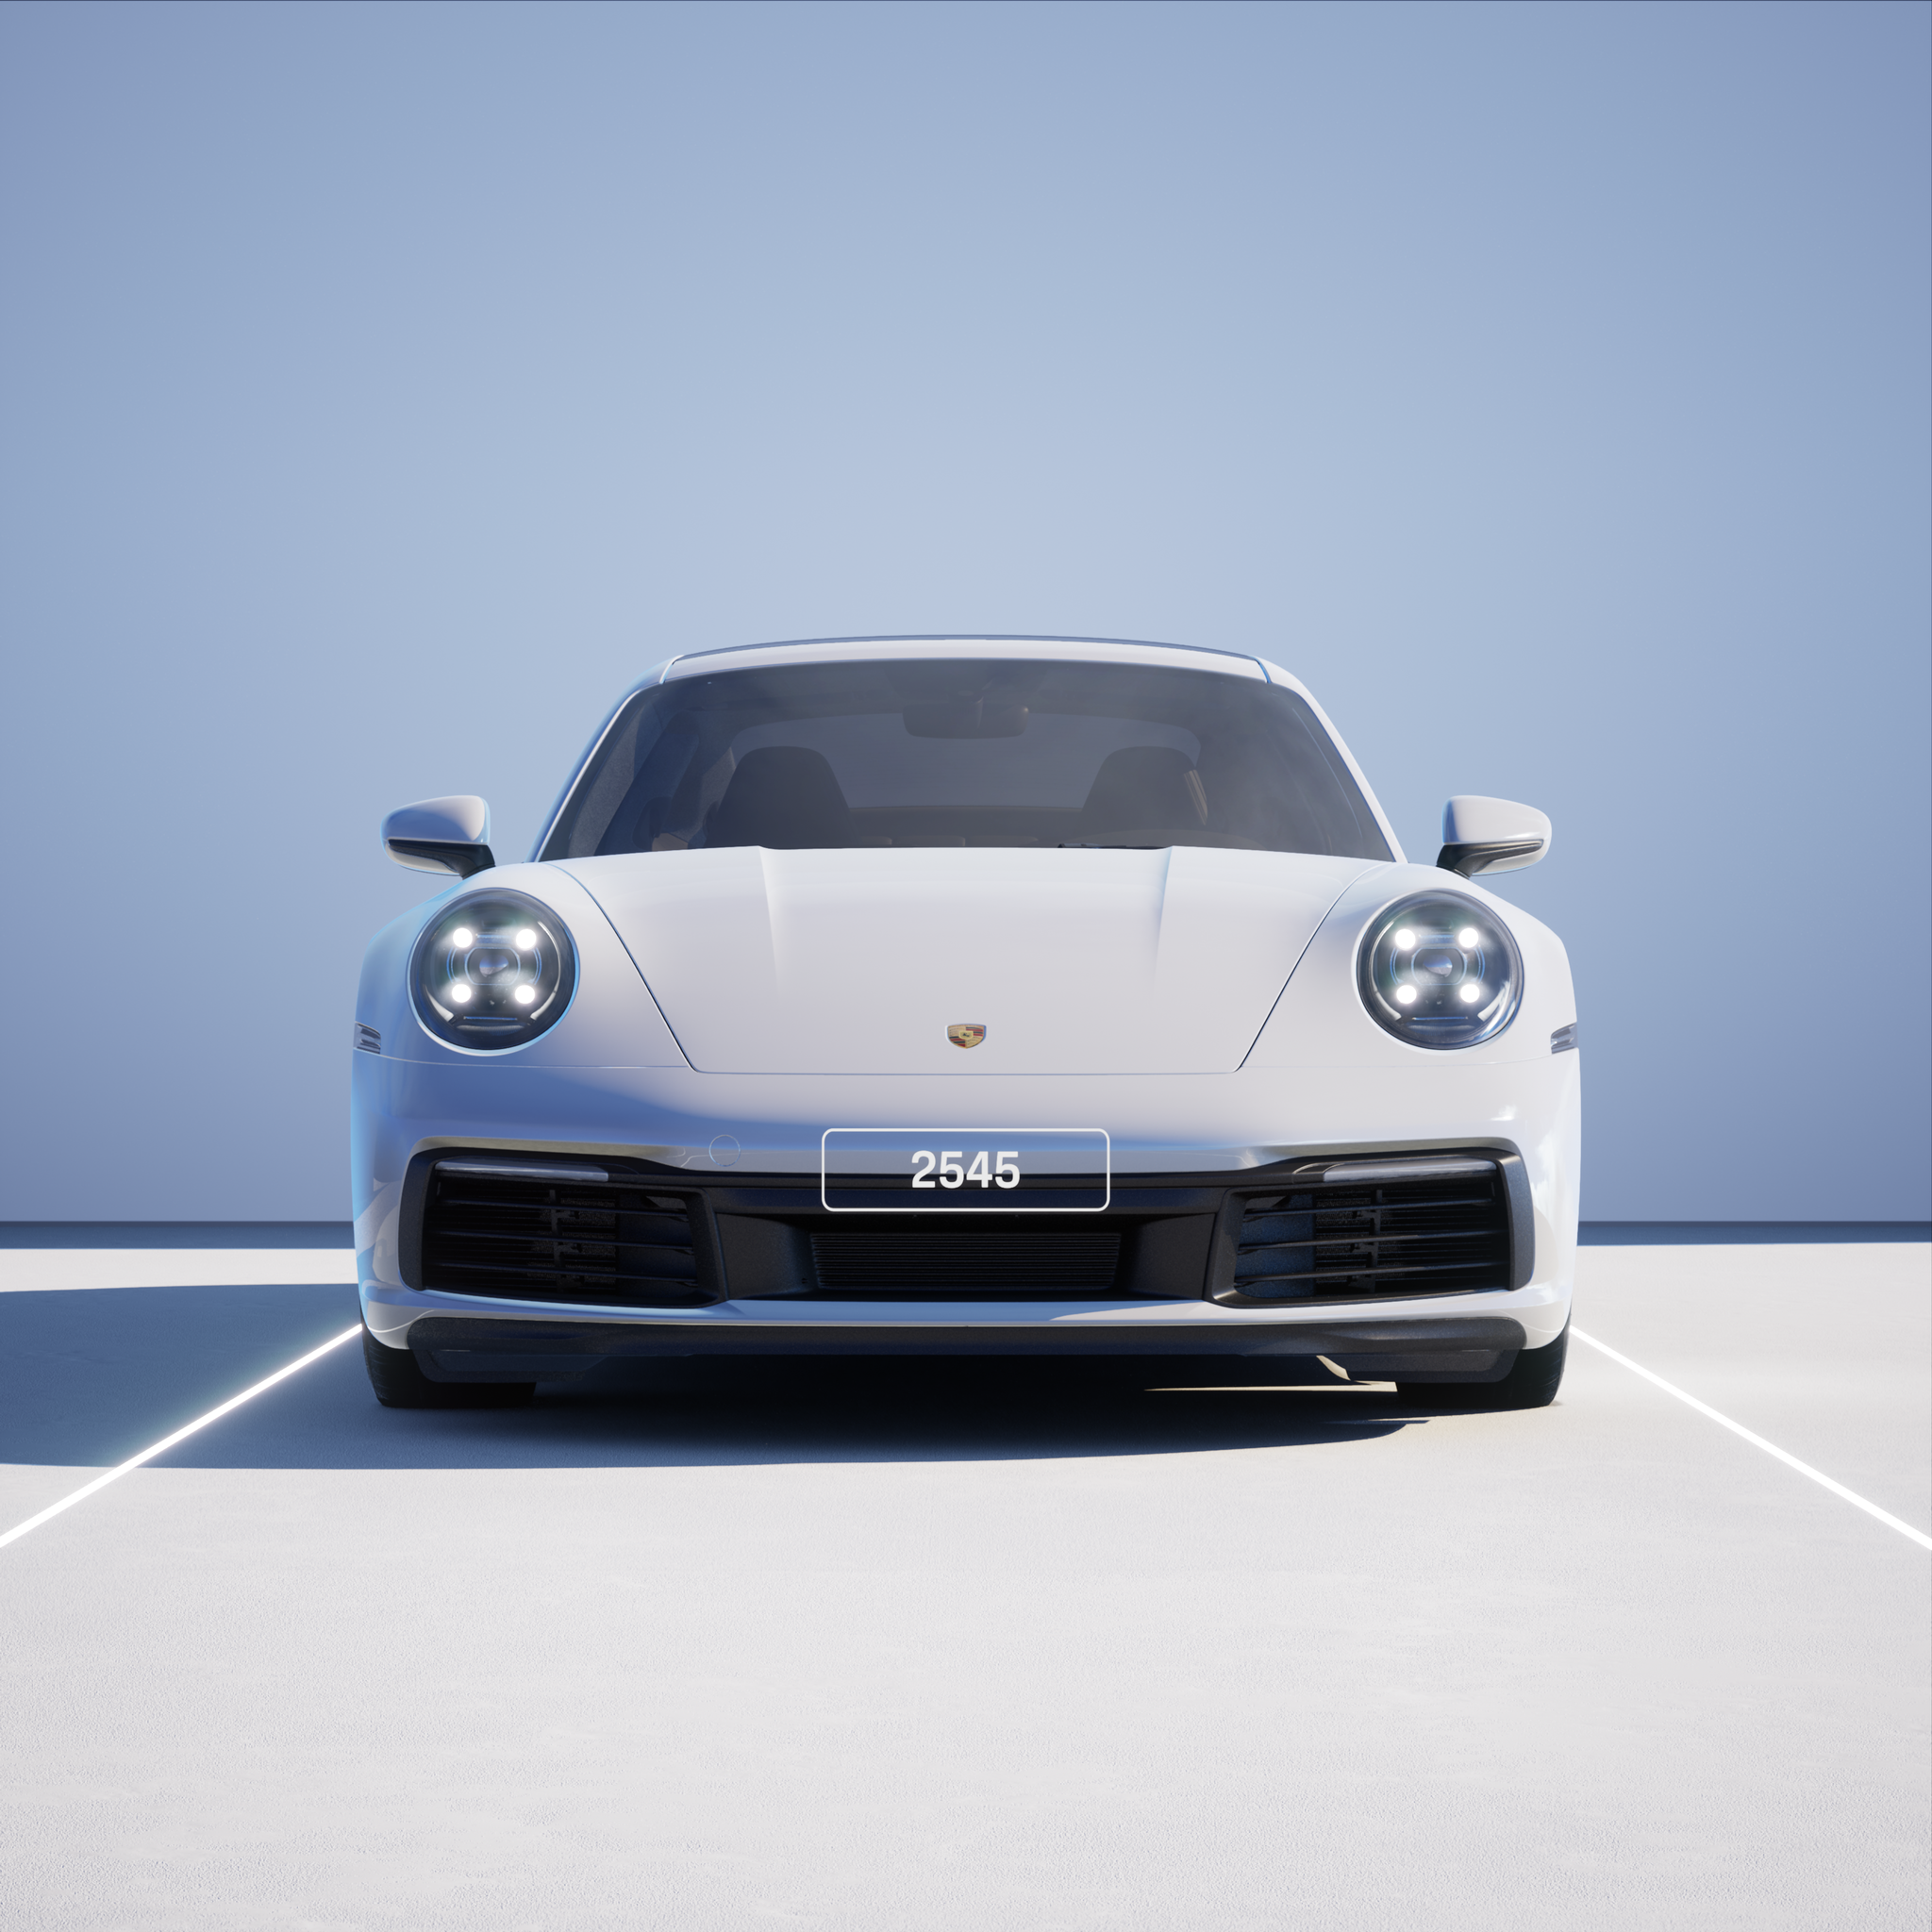 The PORSCHΞ 911 2545 image in phase